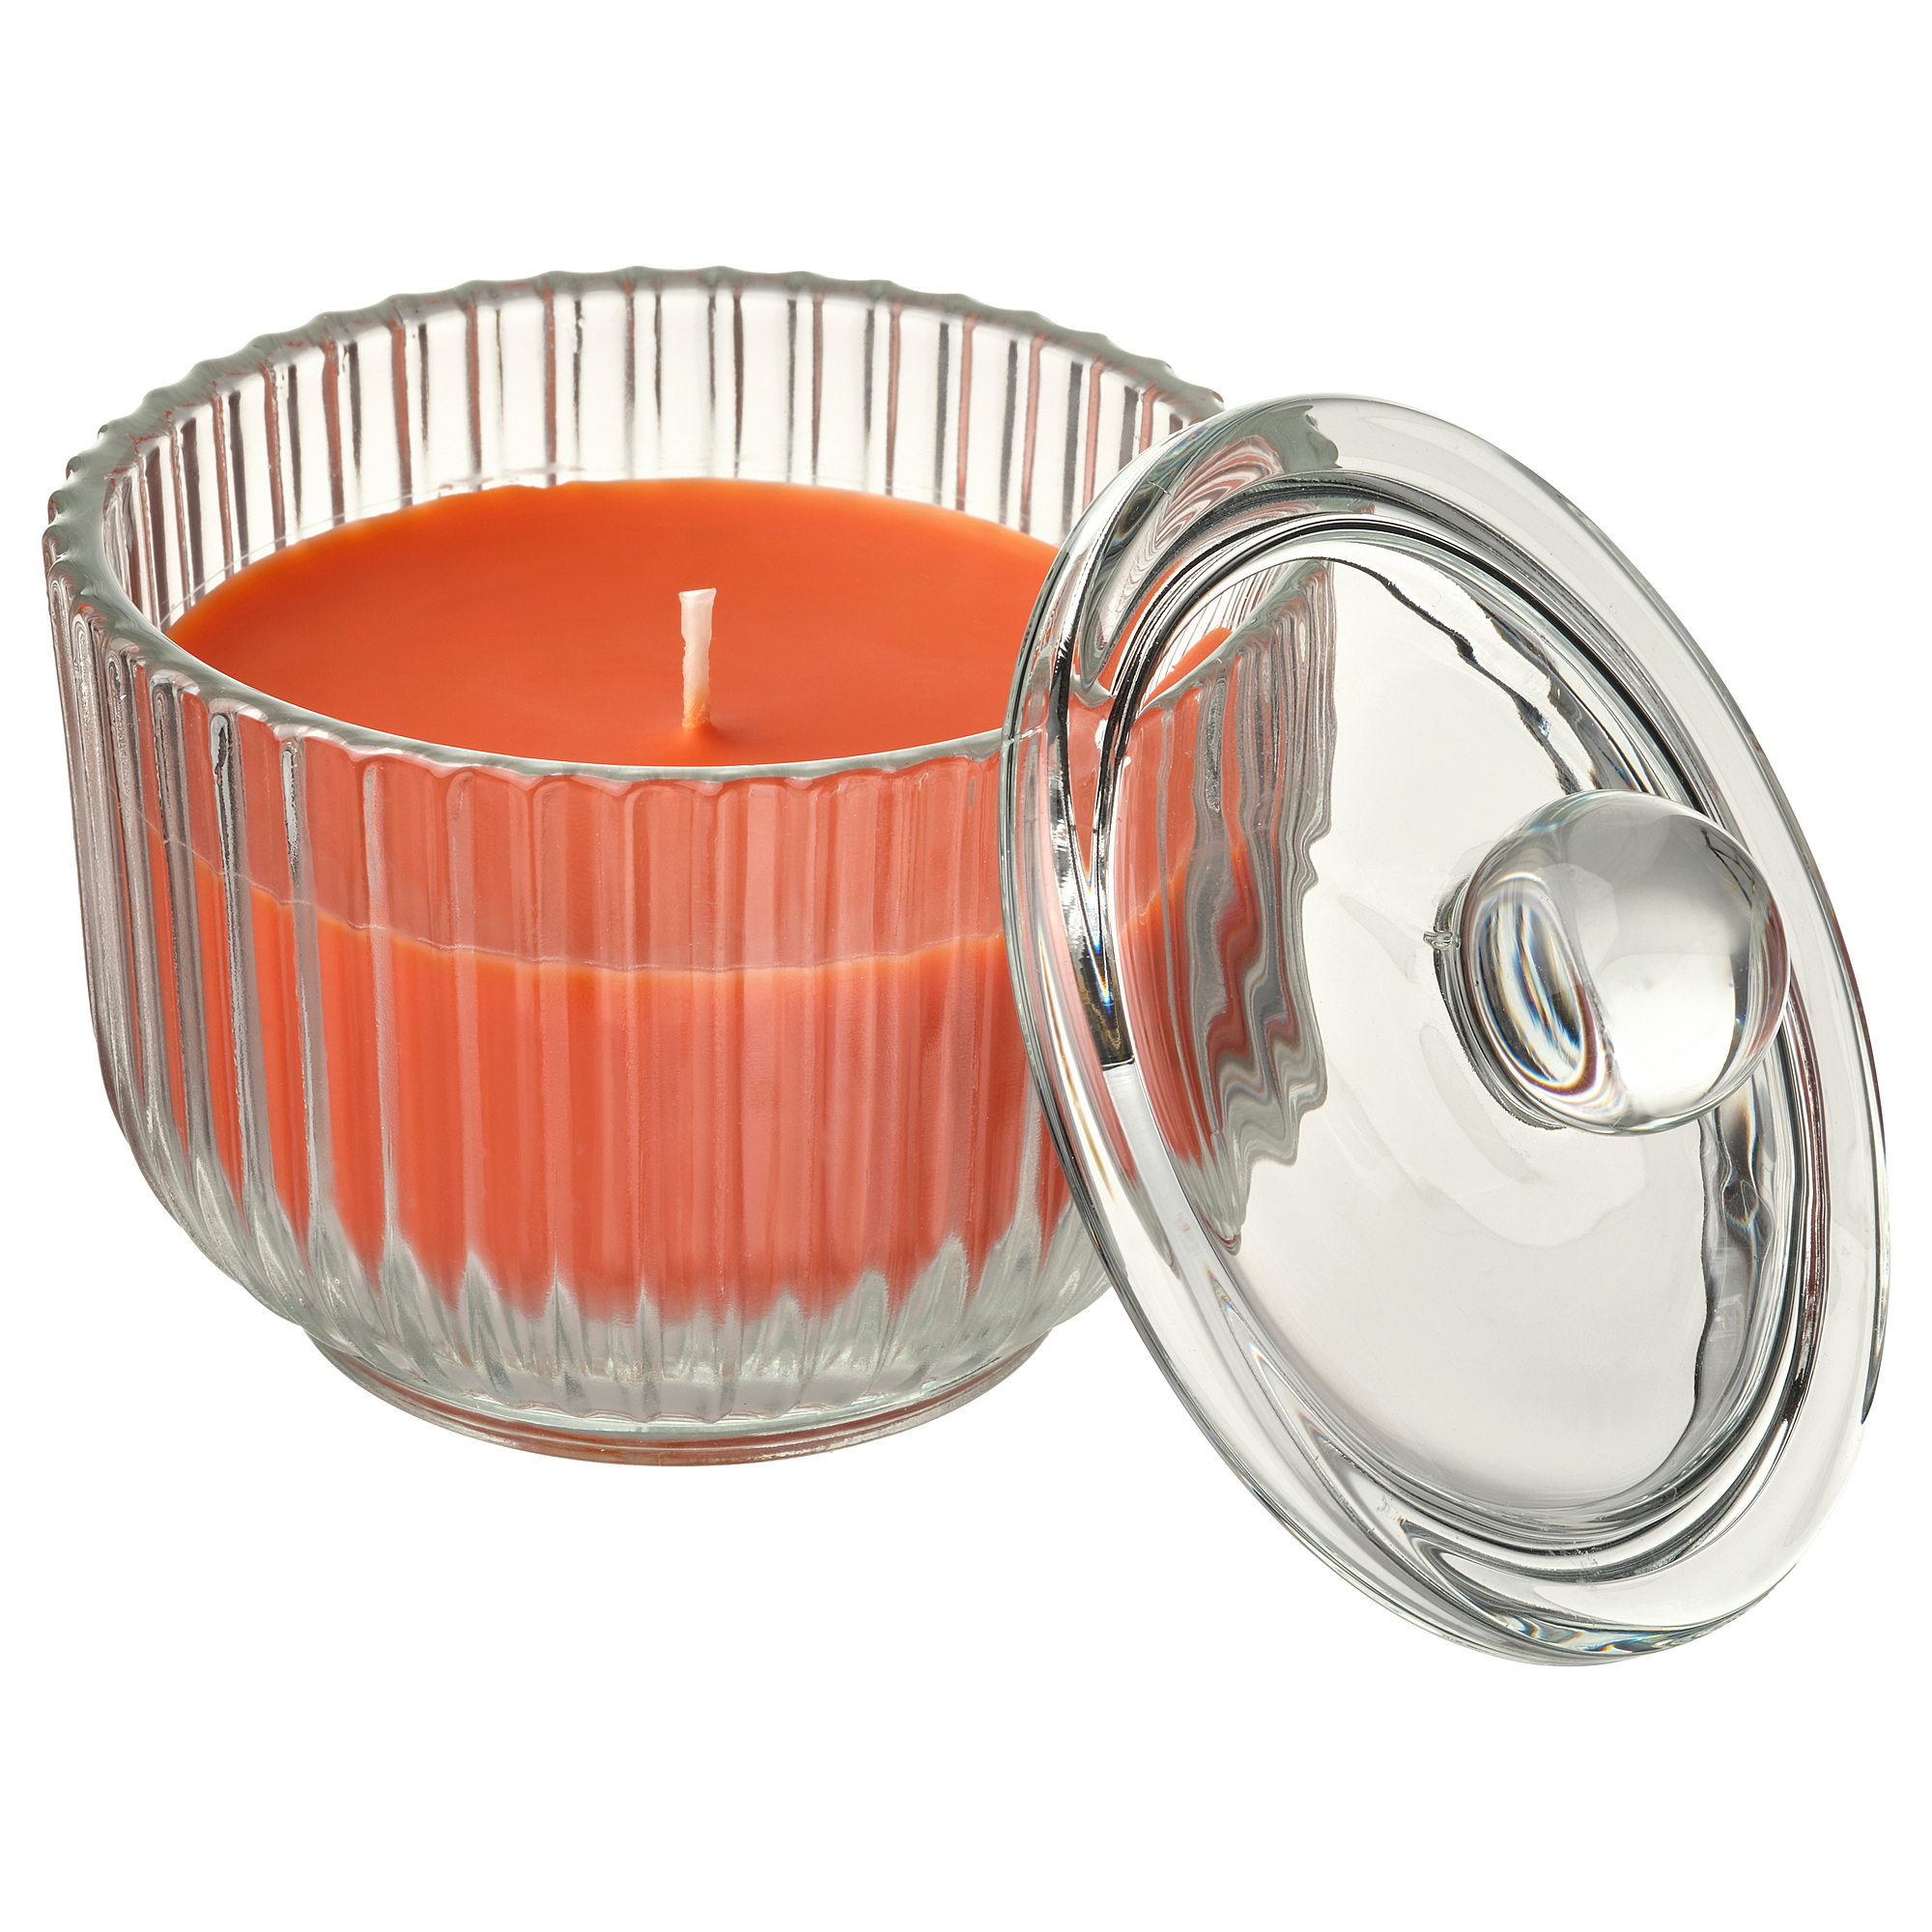 HÖSTAGILLE scented candle in glass